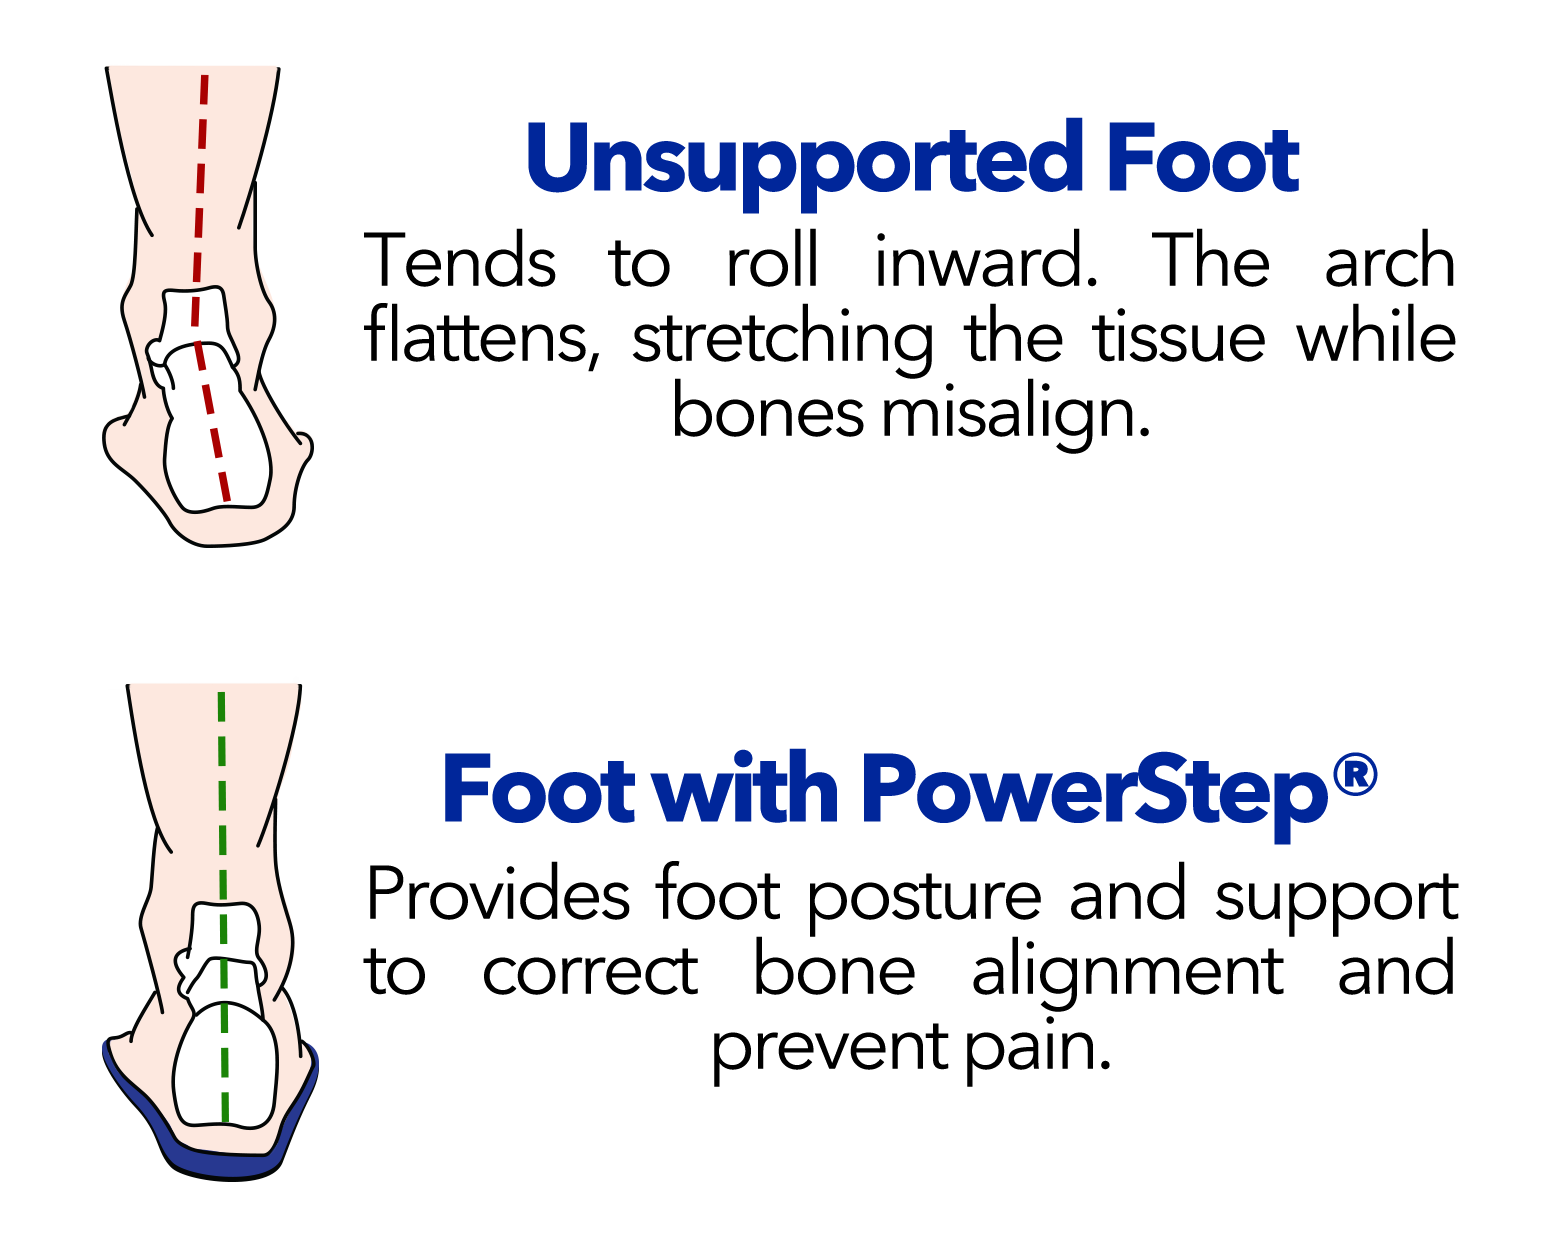 Unsupported Foot: tends to roll inward. The arch flattens, stretching the tissue while bones misalign. Foot with PowerStep®: provides foot posture and support to correct bone alignment and prevent pain.